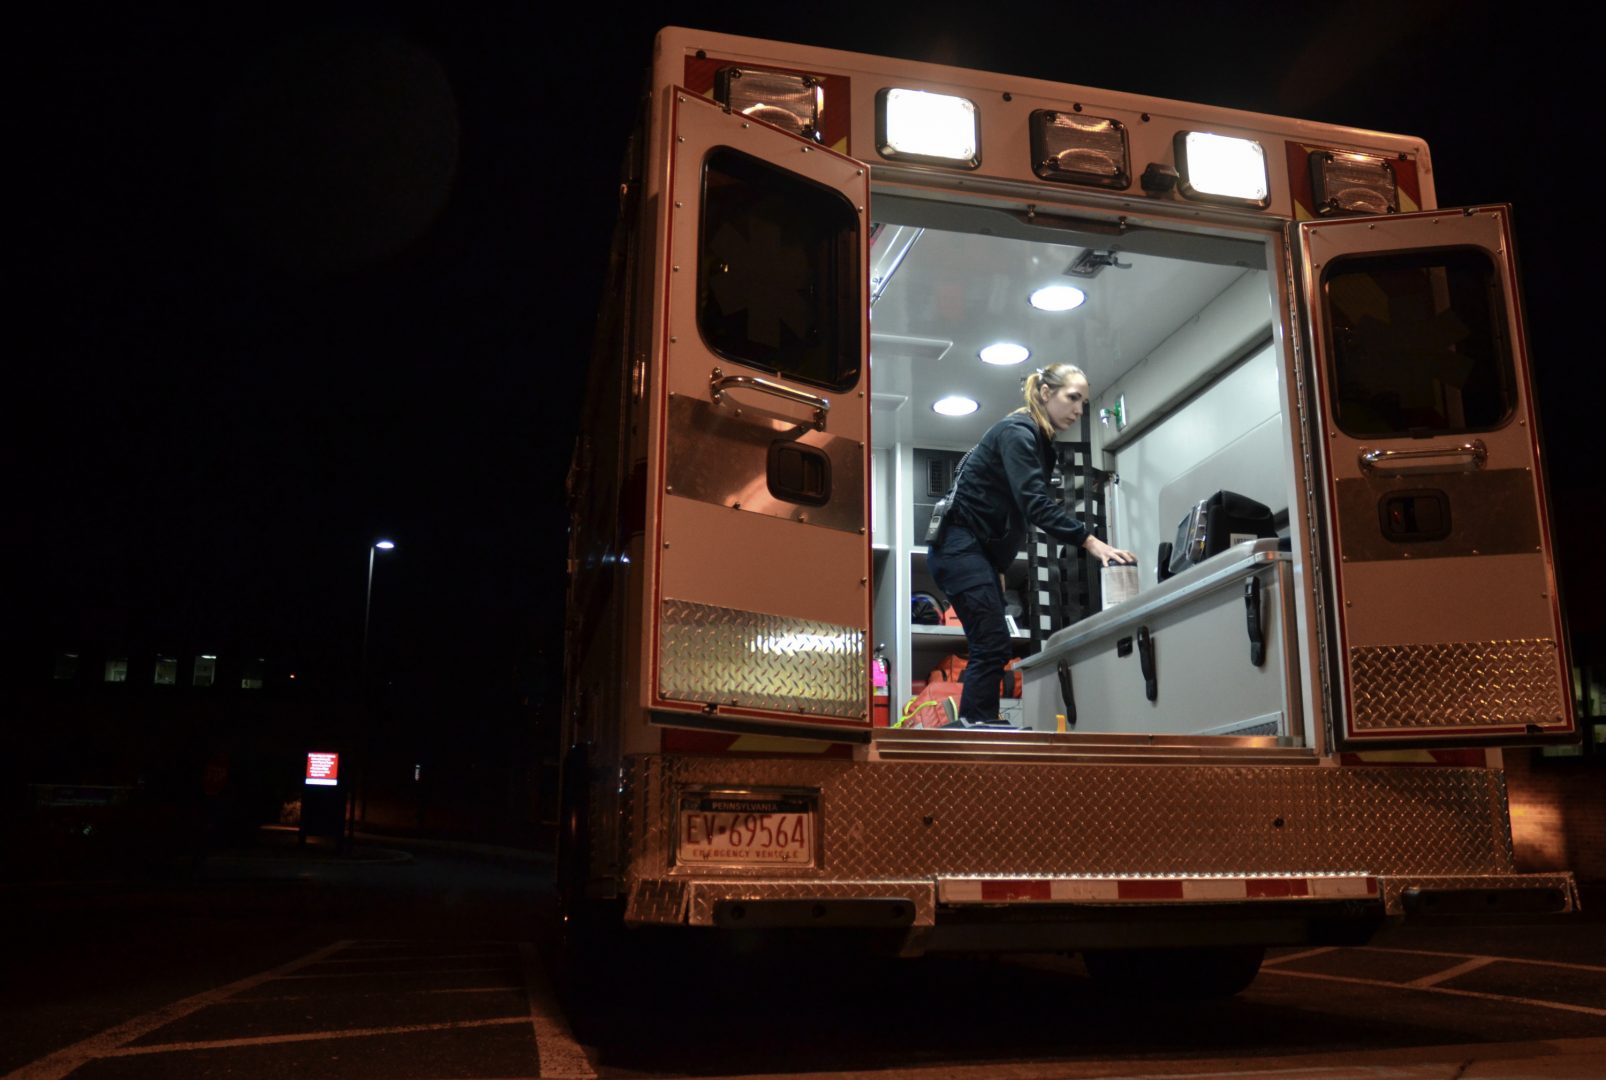 Emergency medical technician Justine Berry with Susquehanna Township EMS in Harrisburg, Pa., cleans an ambulance with antimicrobial wipes after a patient has been removed. EMS directors say more cleaning supplies and protective equipment will be vital if the coronavirus becomes widespread.